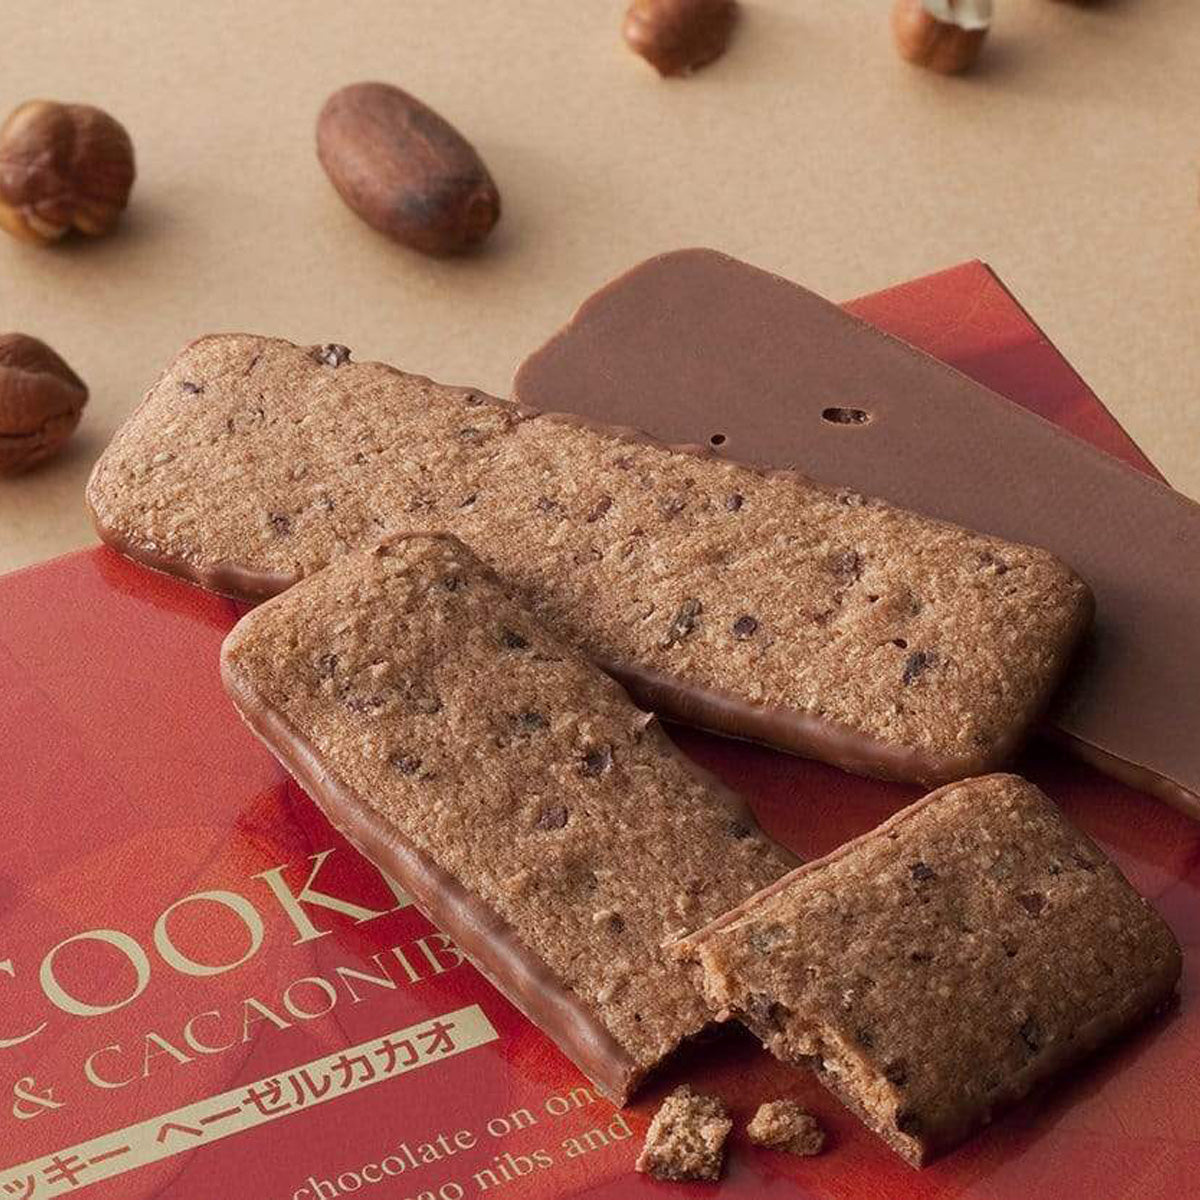 ROYCE' Chocolate - Baton Cookies "Hazel Cacao" - Image shows brown cookies with brown chocolate chips coated with brown chocolate on top of a red box with letters. Accents include nuts in various shapes. Background is brown.